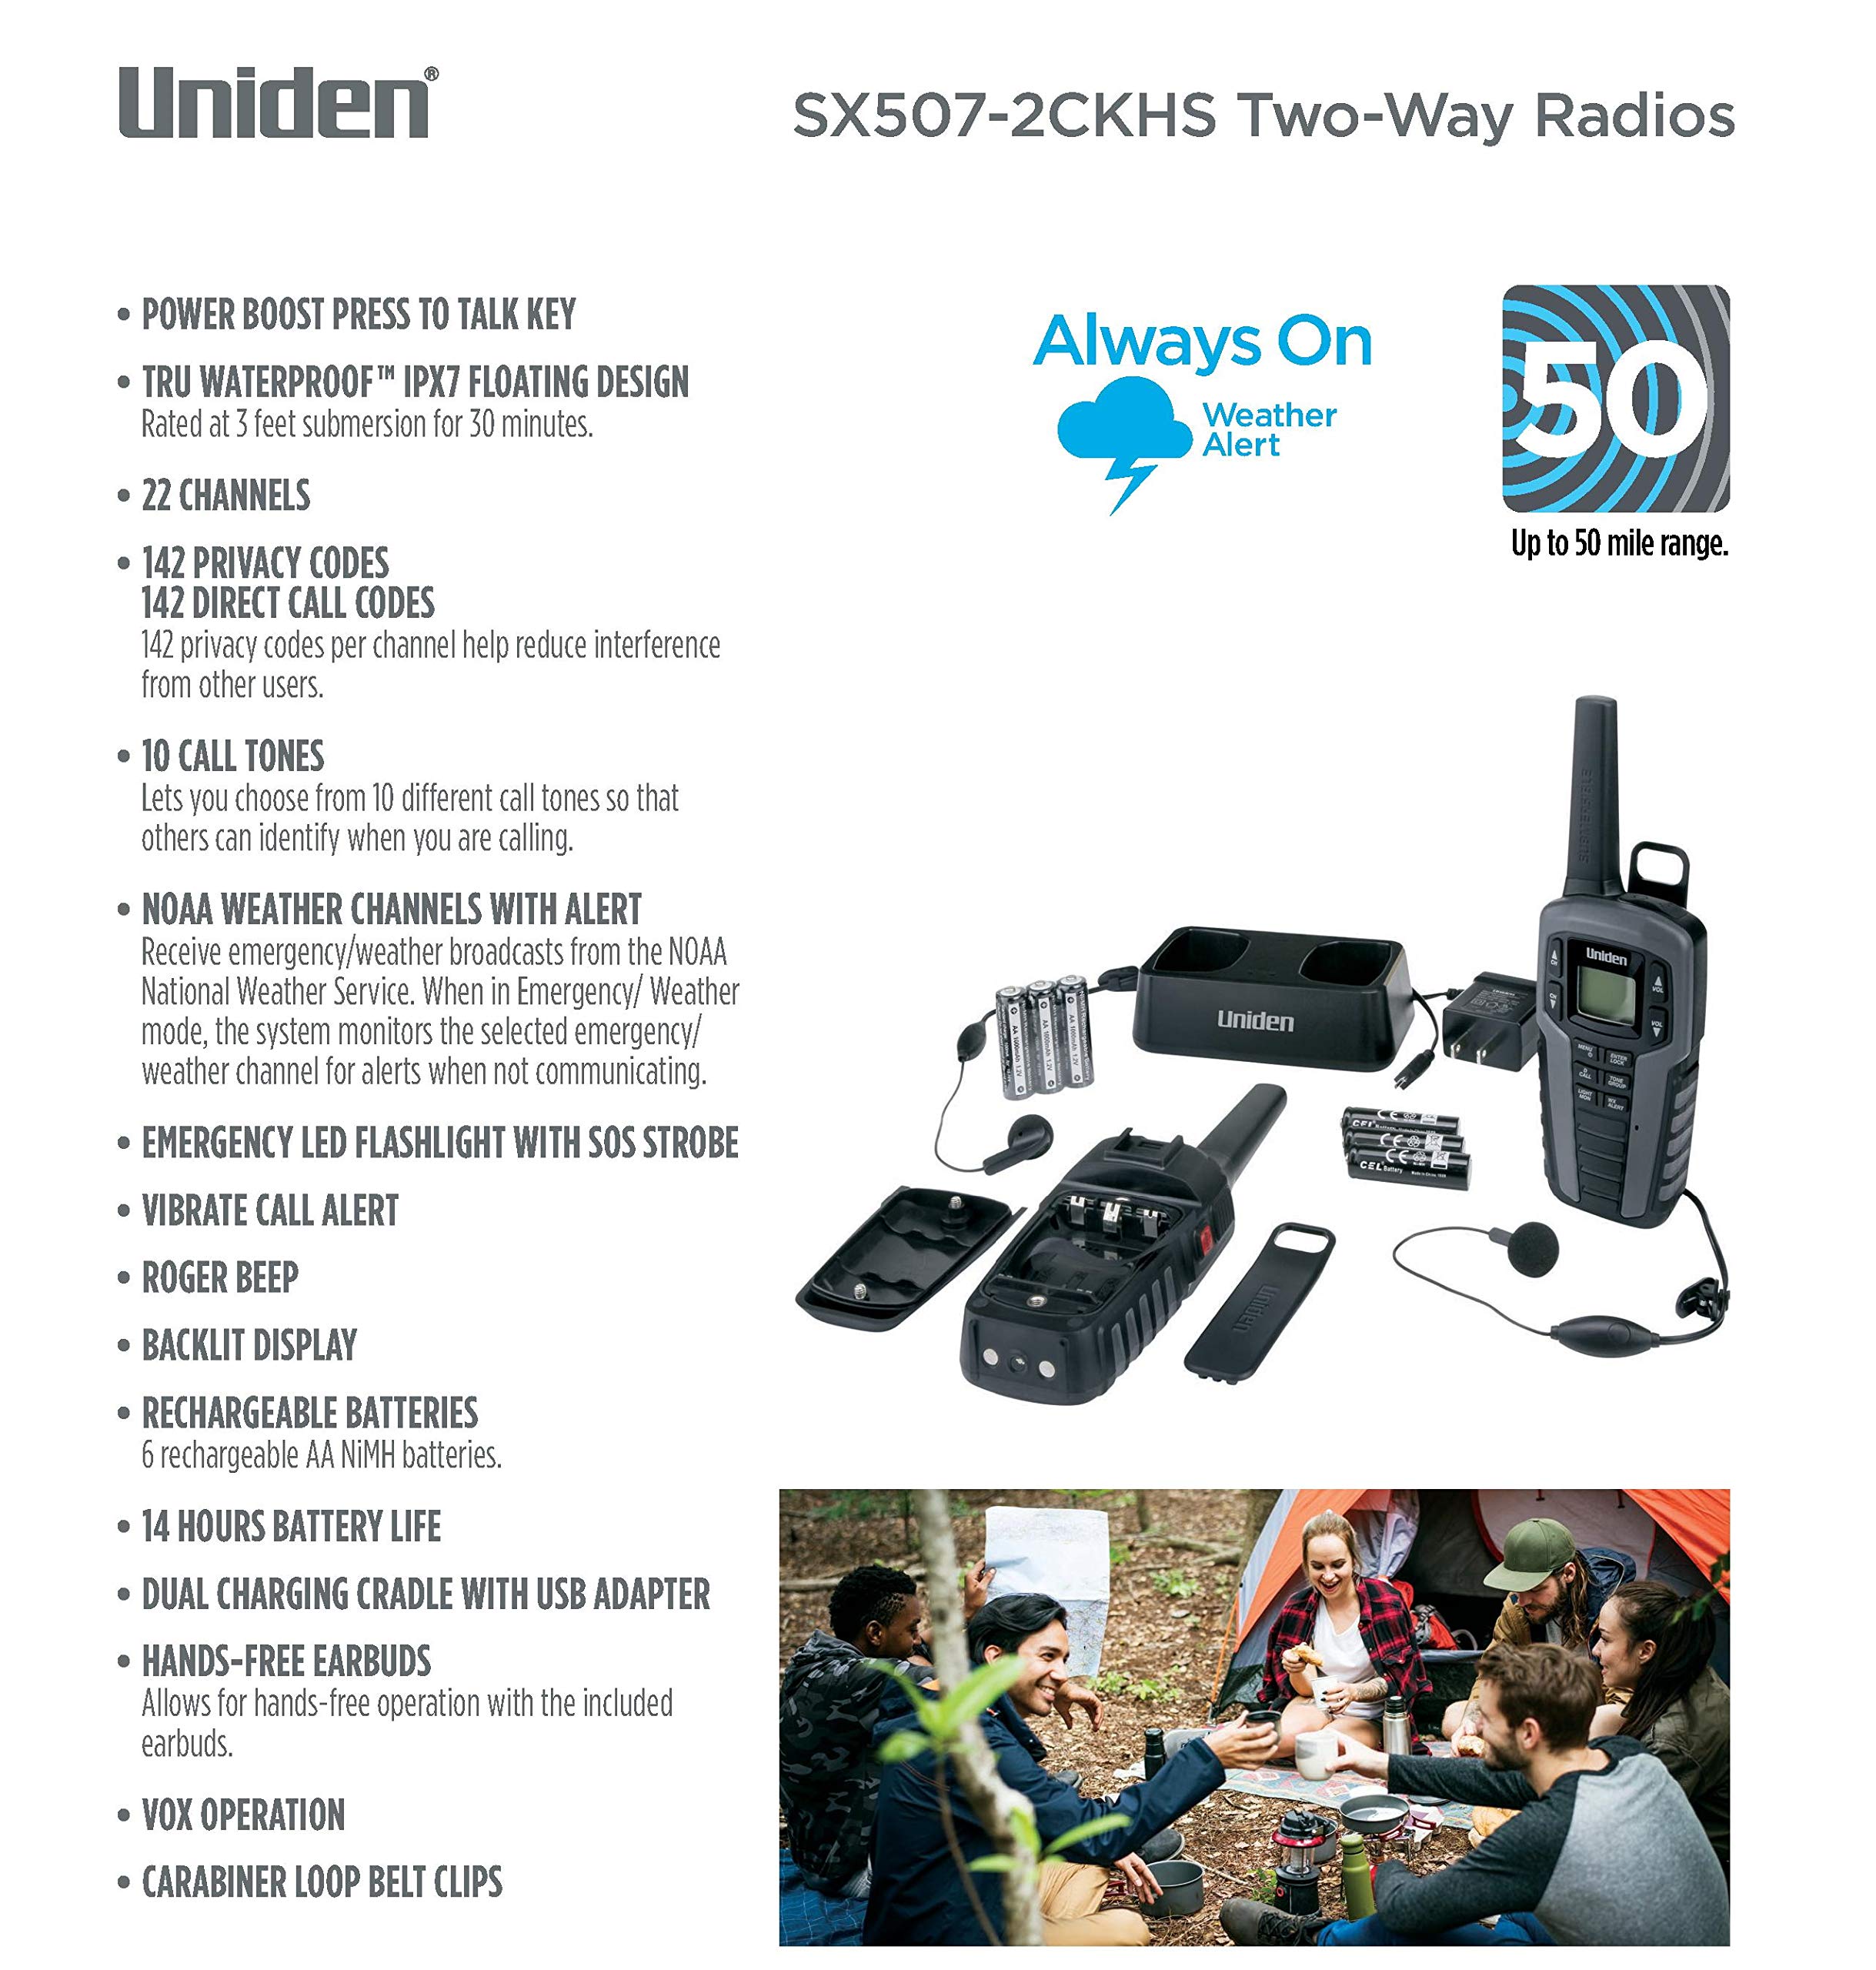 Uniden SX507-2CKHS Up to 50 Mile Range Two-Way Radio Walkie Talkies W/Dual Charging Cradle, Waterproof, Floats, 22 Channels, 142 Privacy Codes, NOAA Weather Scan + Alert, Includes 2 Headsets, Grey